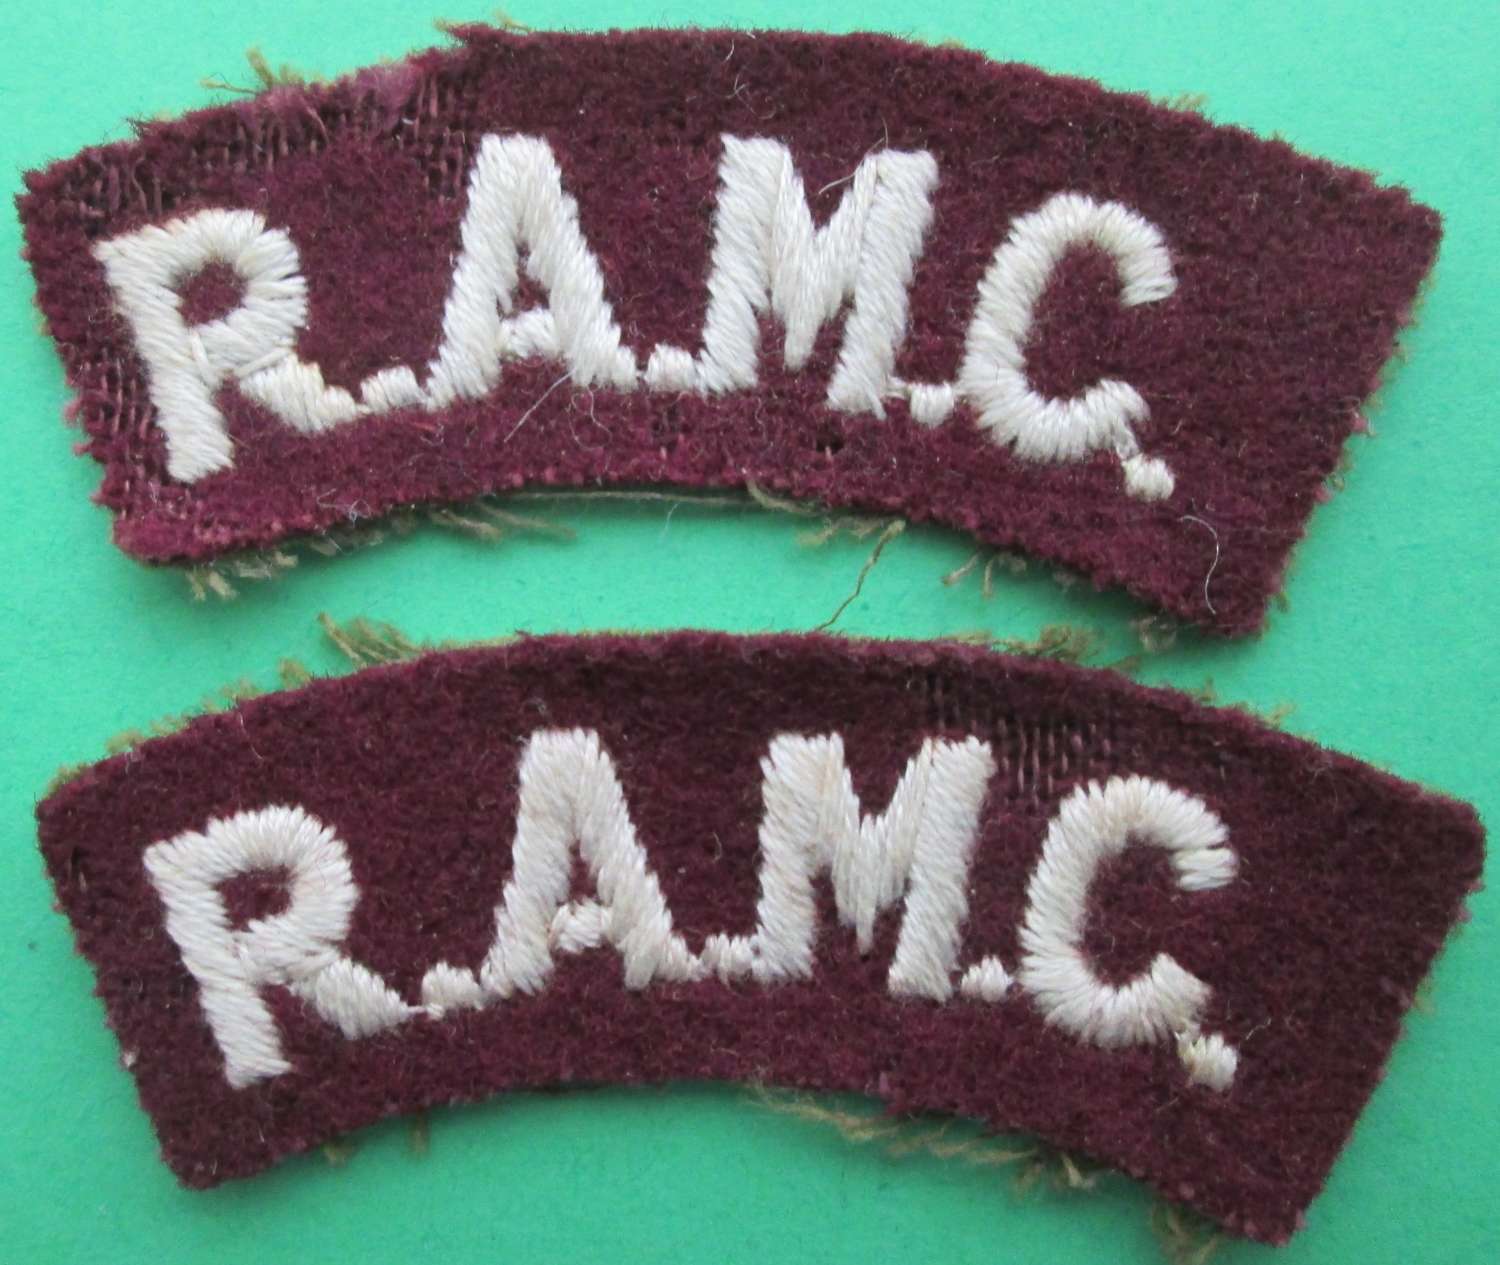 A PAIR OF ROYAL ARMY MEDICAL CORPS SHOULDER TITLES